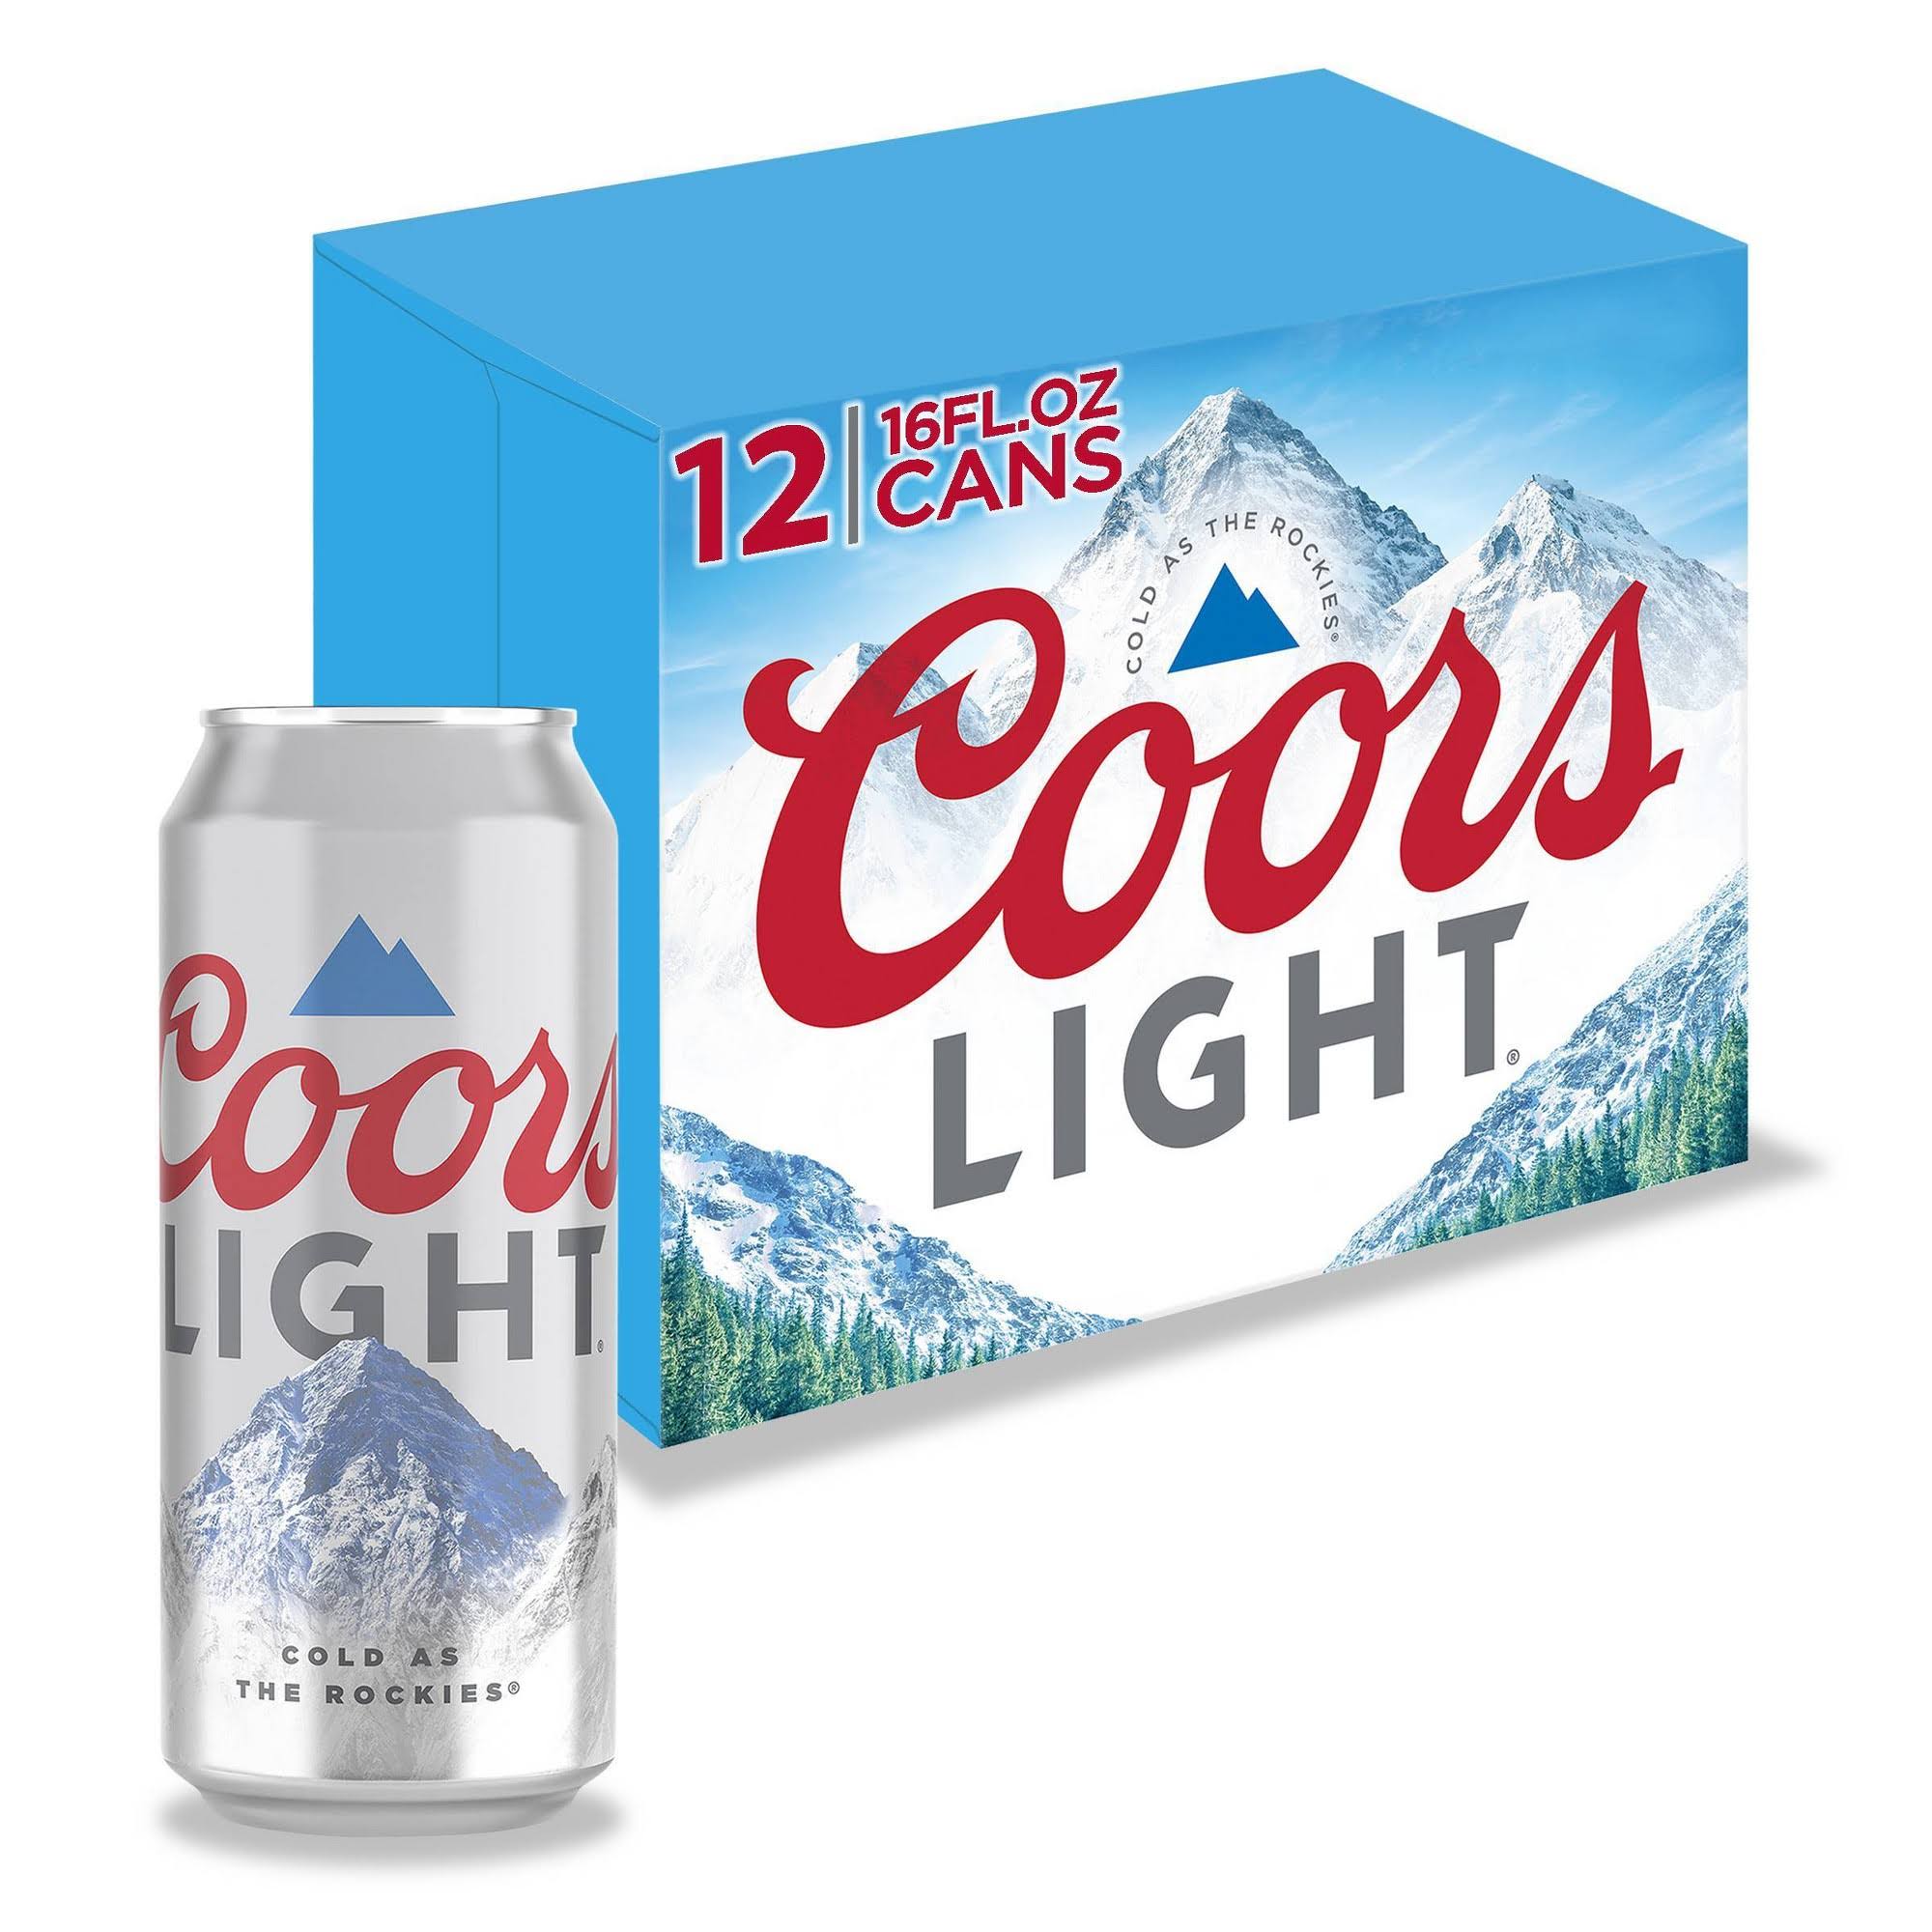 Coors Light Beer - 12 Cans